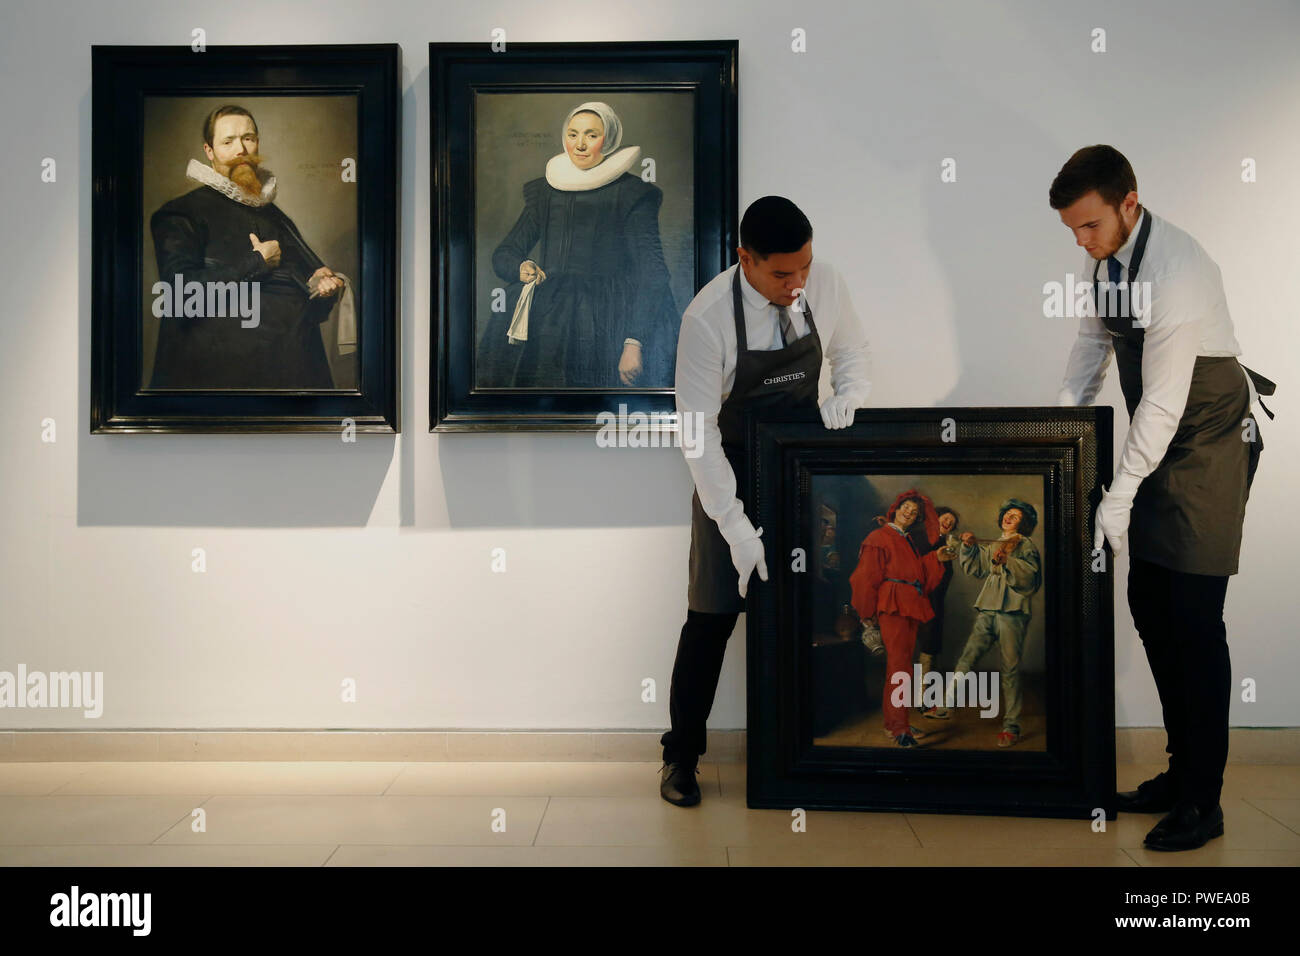 London, UK, 16th Oct 2018. Christie's art handlers hold Judith Leyster 's artwork 'Merry Company' also pictured (left) Frans Hals 's works 'Portrait of a Gentleman holding a pair of gloves' and ' Portrait of a lady holding a handkerchief' at Christie's Auction House in London, UK, Tuesday October 16, 2017. The pieces are expected to achieve up to £2.5million and £12million for the pair respectively when they come to auction as part of the Albada Jelgersma Collection sale during Christie's Classic Week in December. Photograph : Credit: Luke MacGregor/Alamy Live News Stock Photo